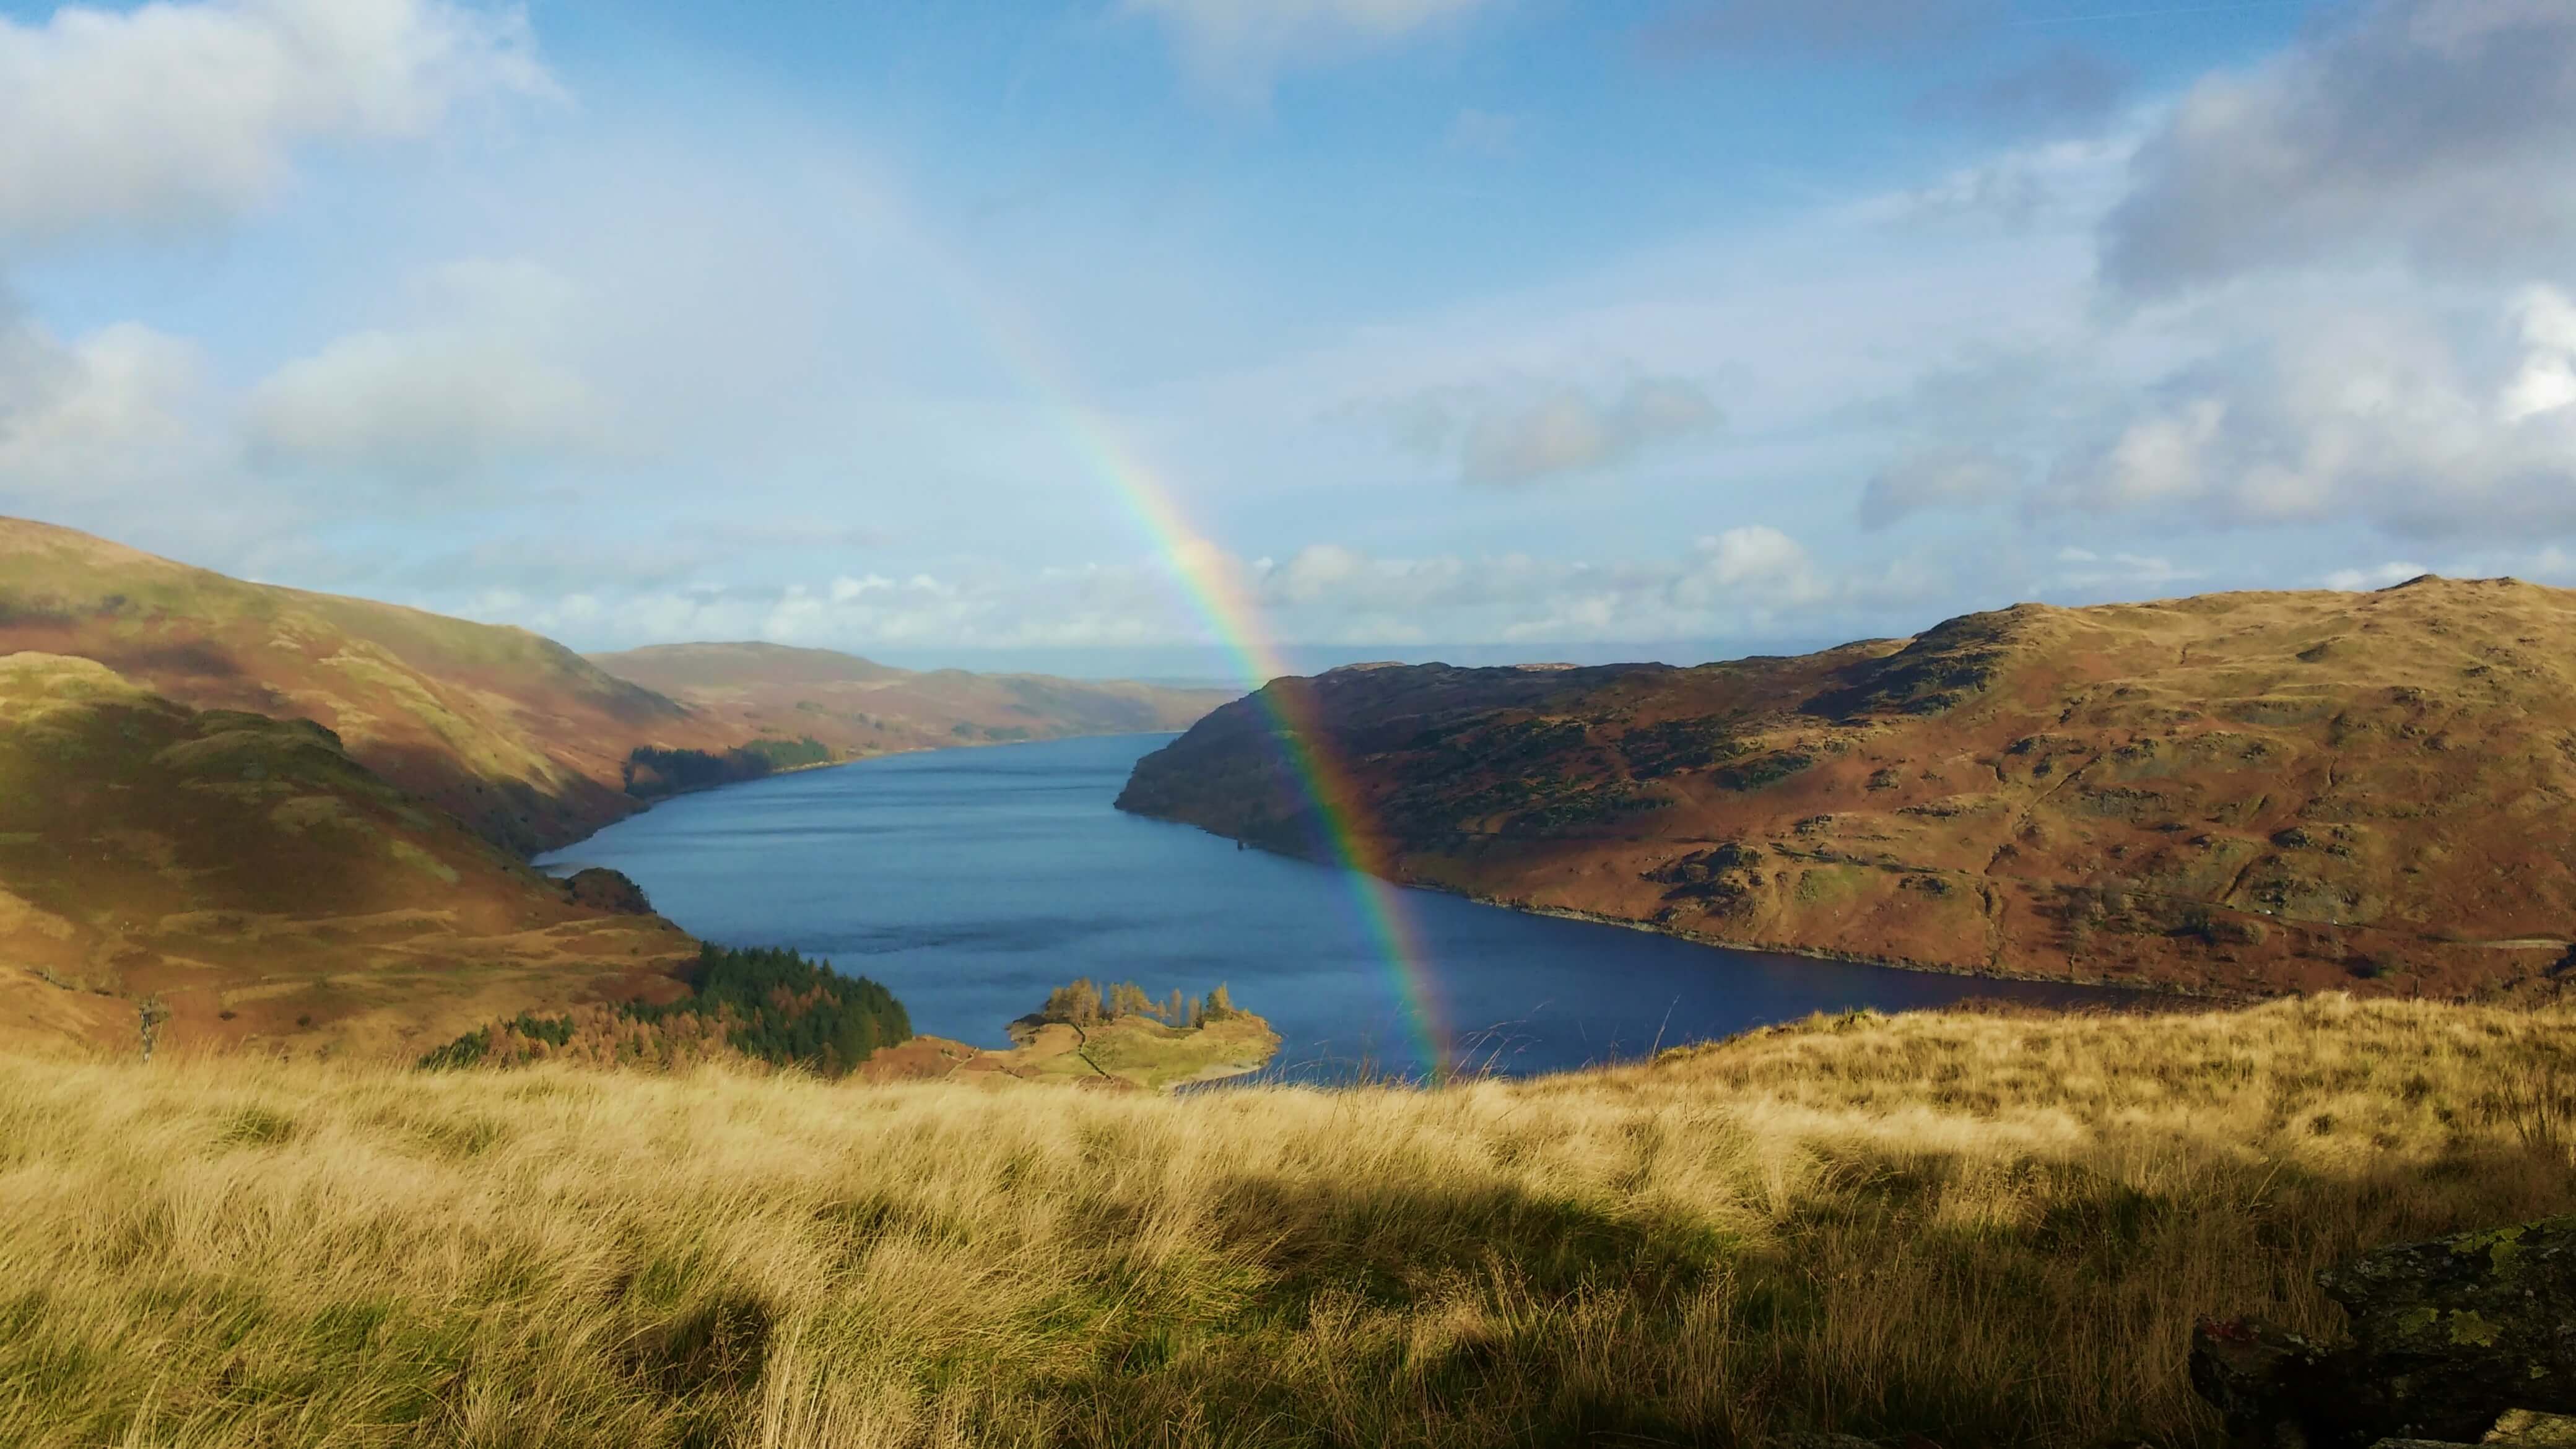 A rainbow dipping into a lake surrounded by hills